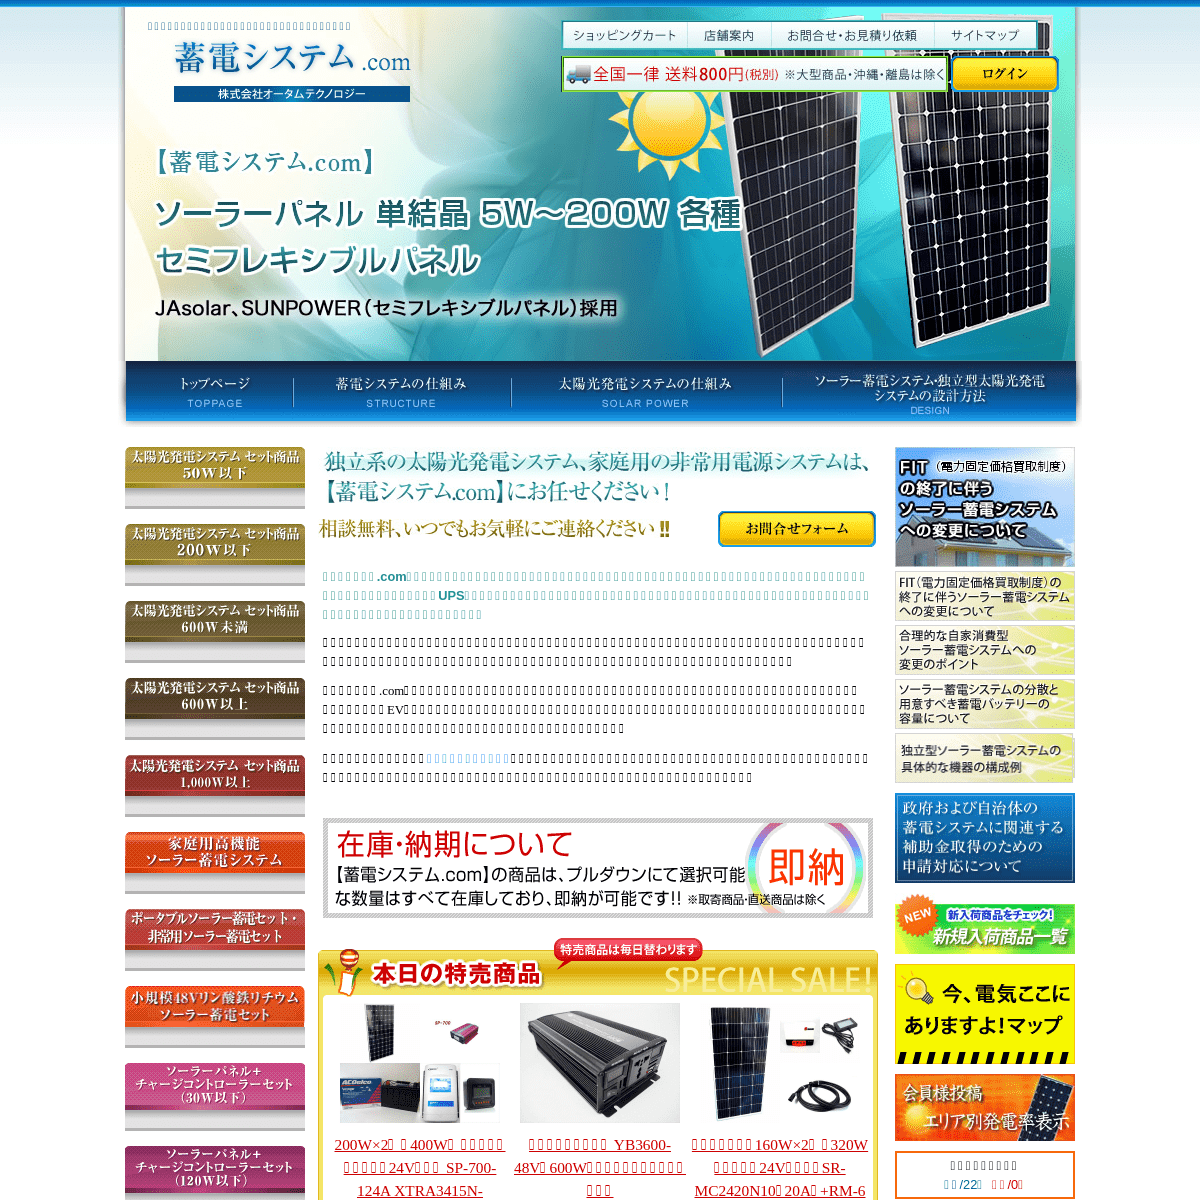 A complete backup of chikuden-sys.com